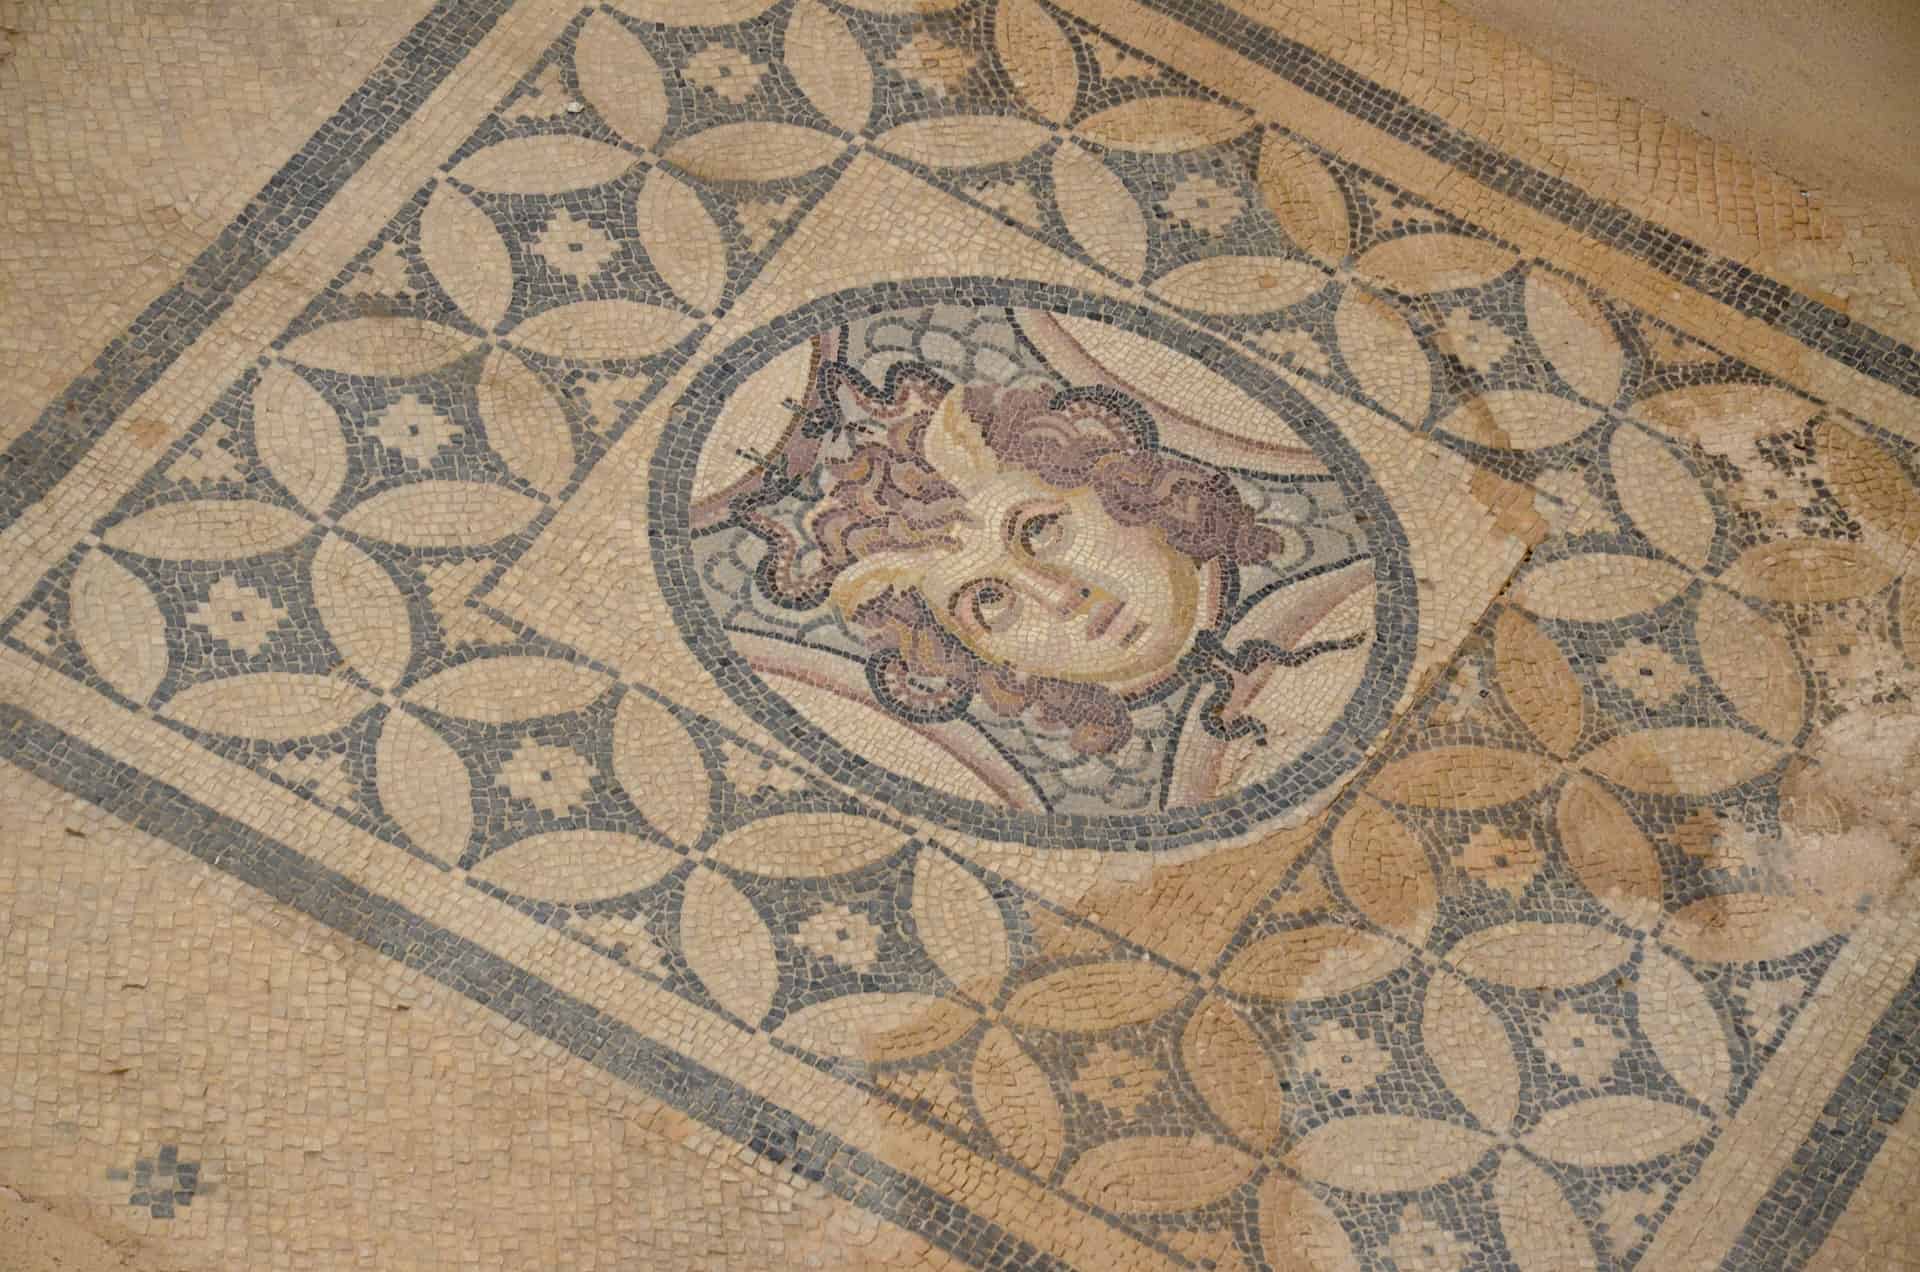 Mosaic of Medusa in Room 16a in Dwelling Unit 3